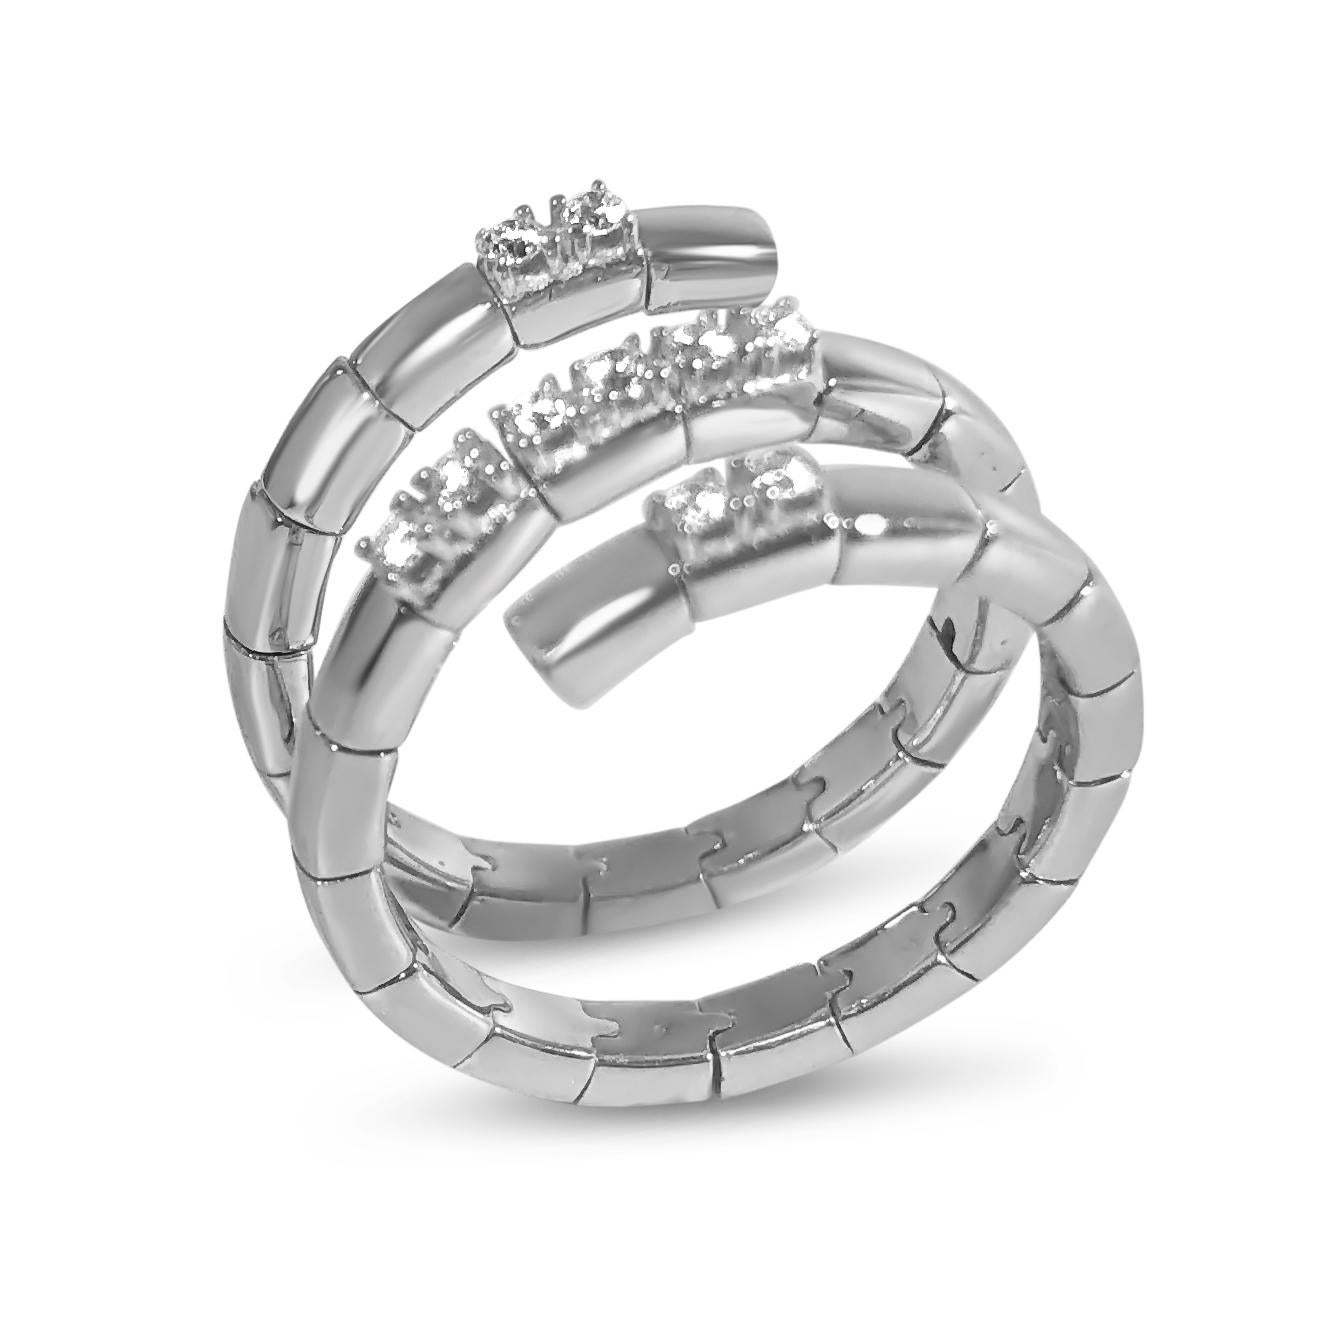 Specifications:
- 18kt White Gold
- Handcrafted in Switzerland
- Customization, made-to-order available in precious stone type, precious metal type, and size 
 (prices may vary)
- Style #: OE MAN 551 12 OB BRI.0.20

All items on the site are in